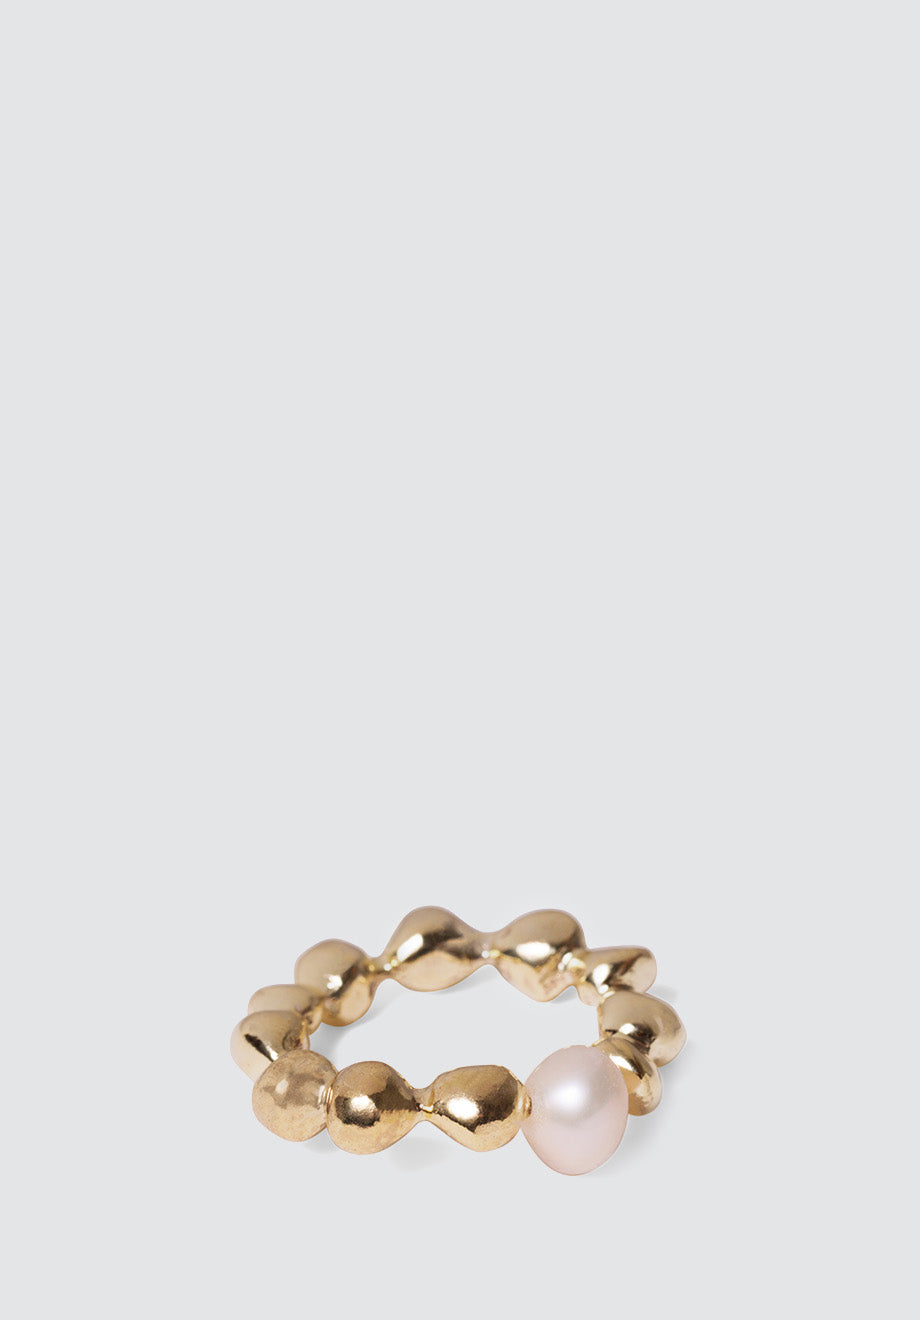 Pebble ring with Cultured pearl